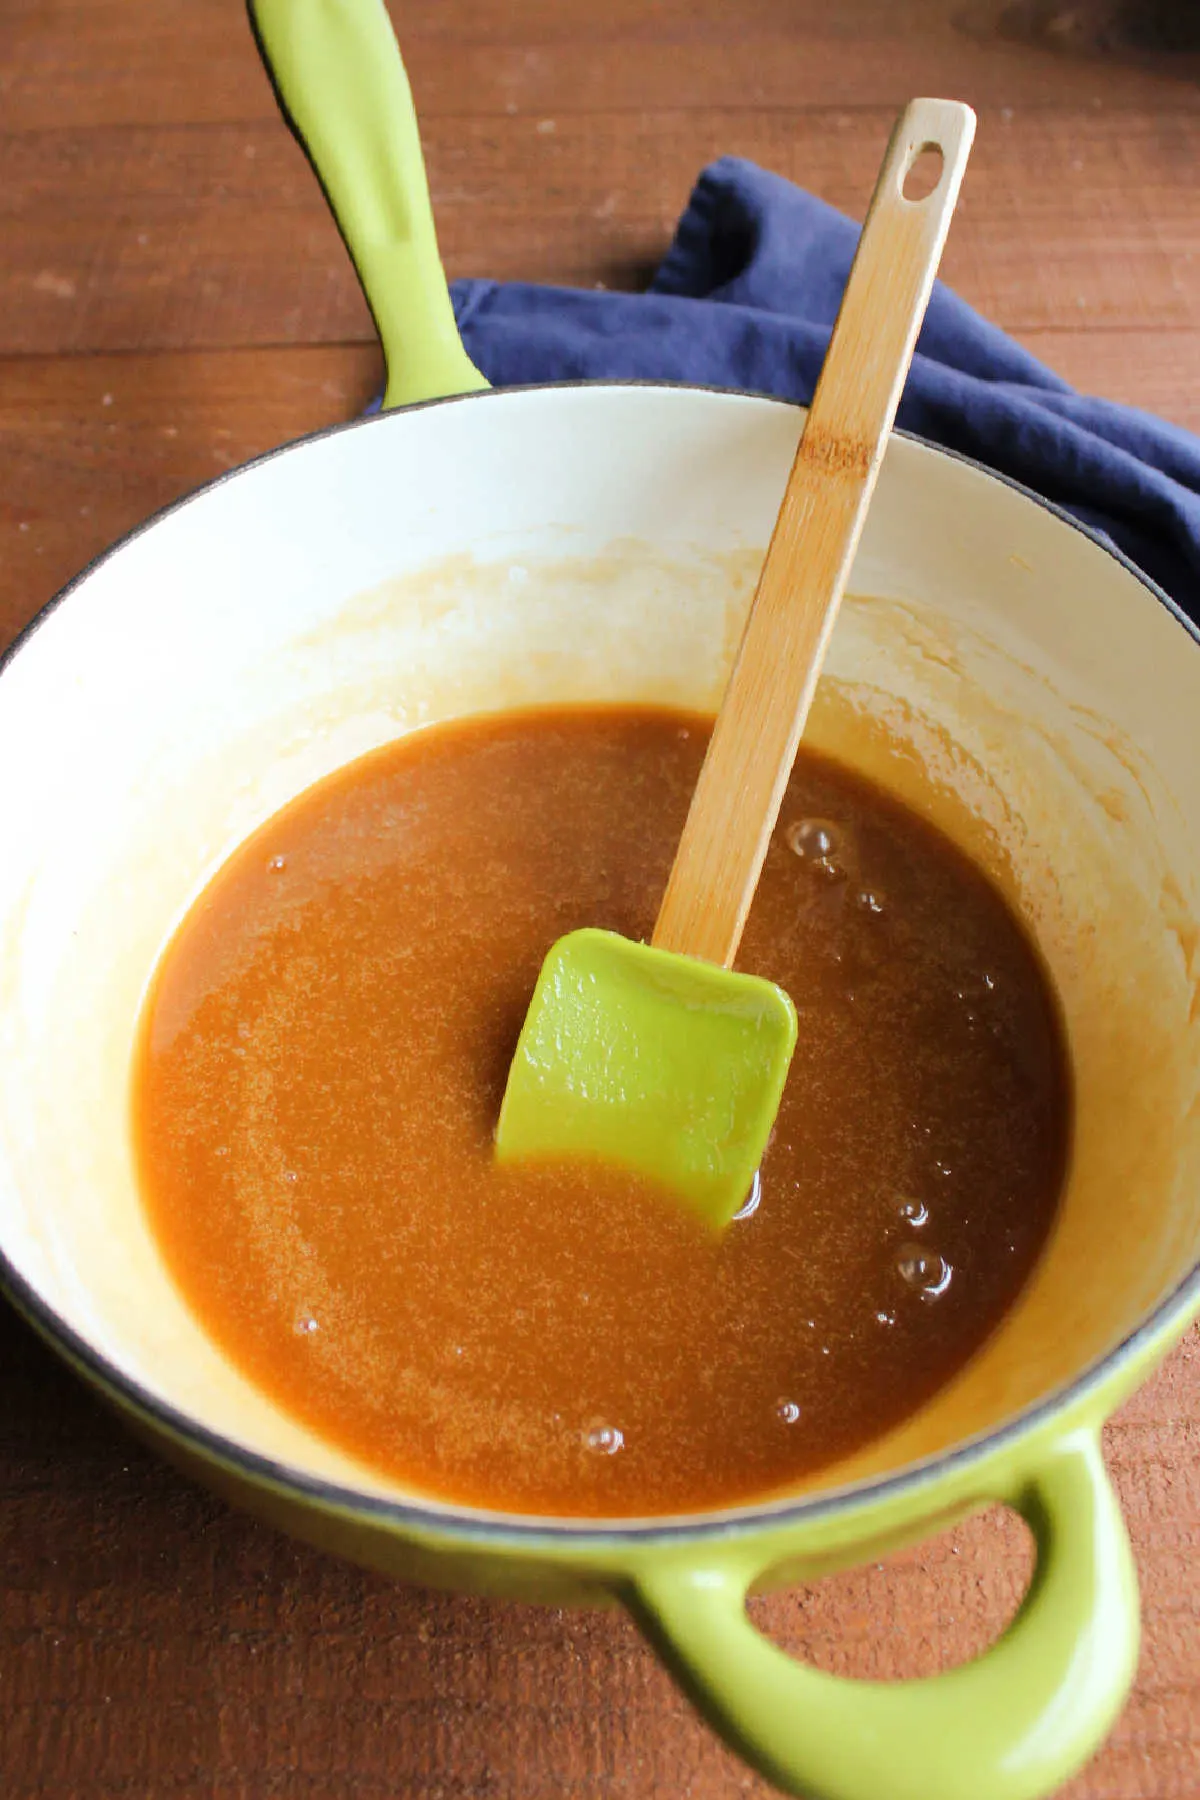 Enameled cast iron saucepan filled with freshly made apple cider caramel sauce and a spatula.